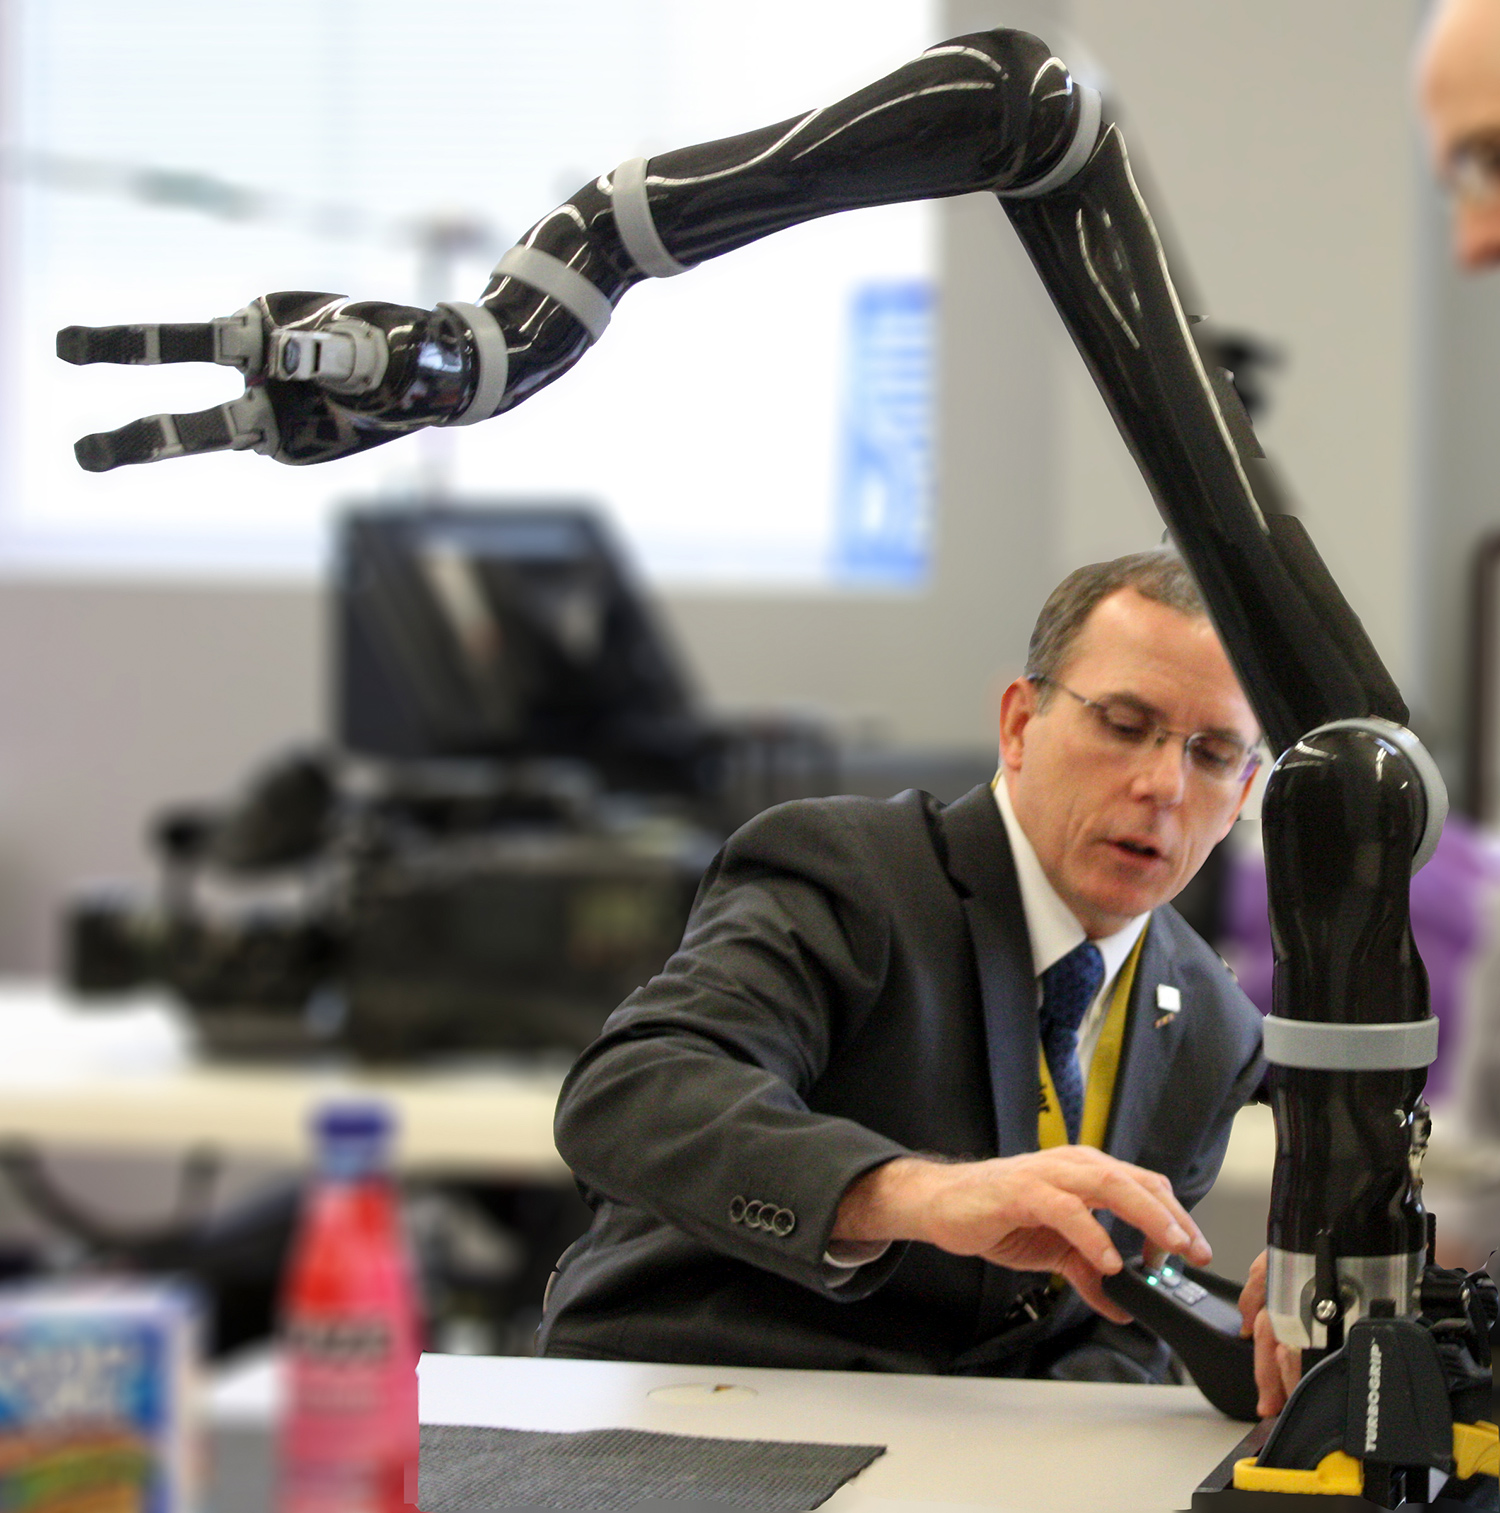 Cooper in lab in a suit working on a robotic arm